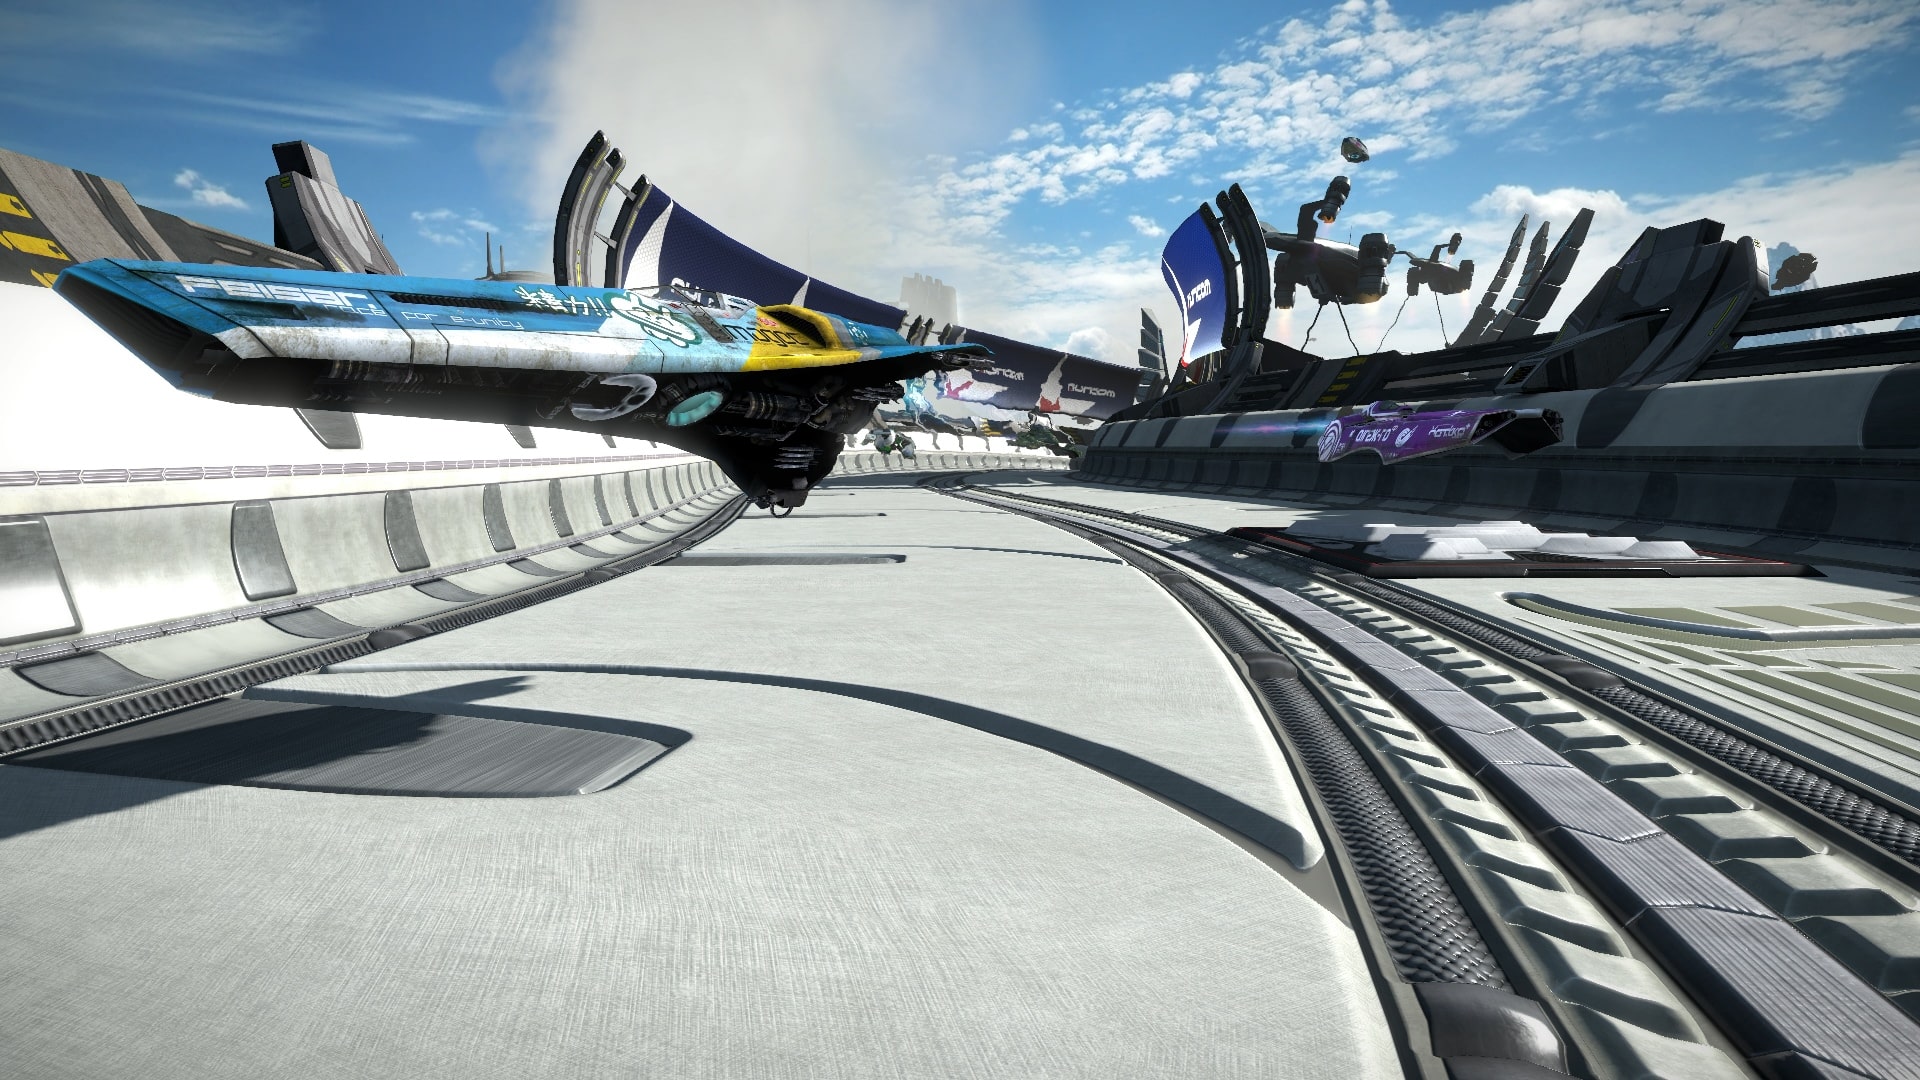 wipeout ps store